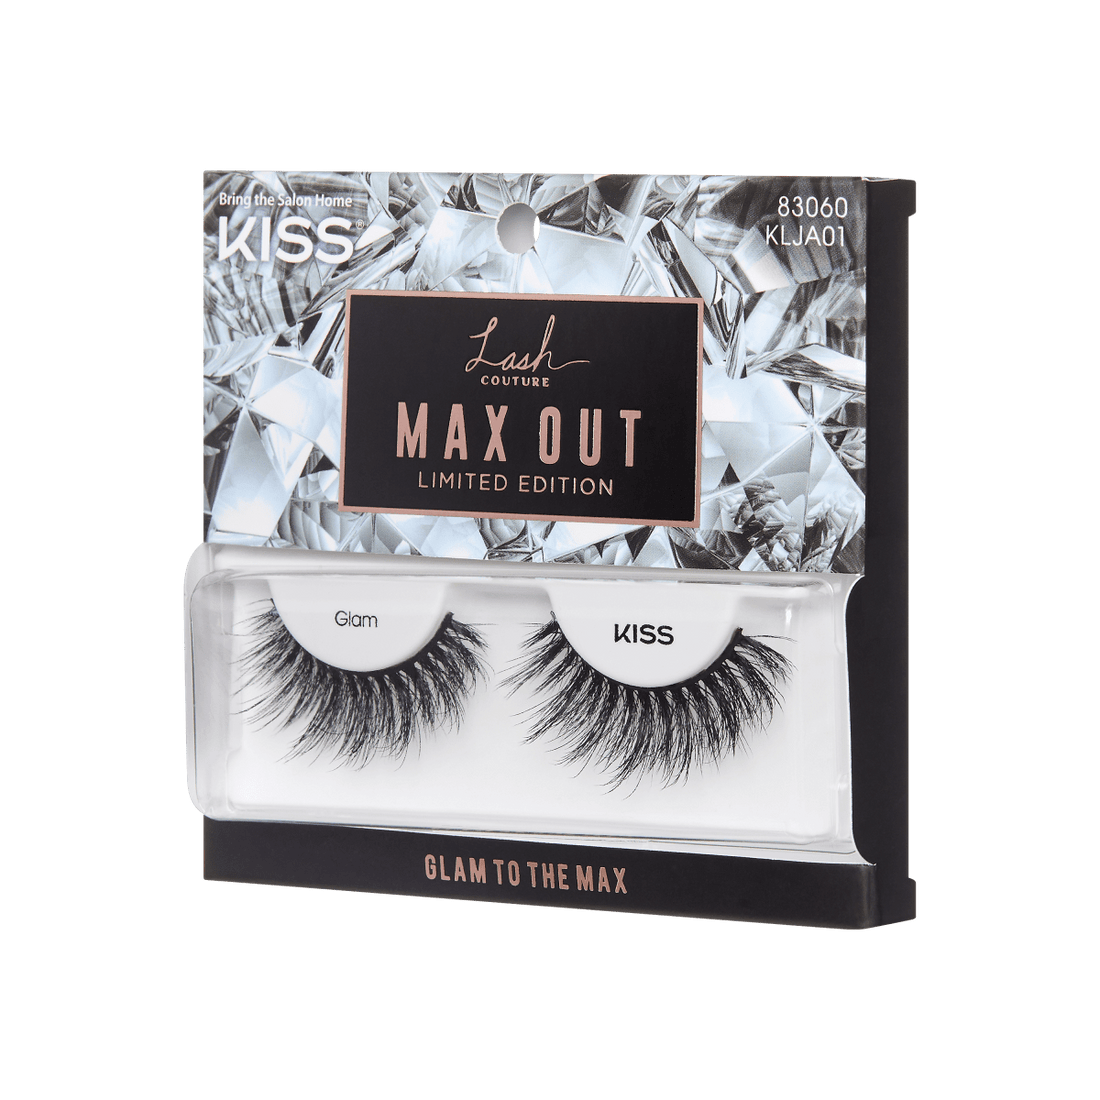 KISS Lash Couture Max Out Limited Edition - Glam to the Max